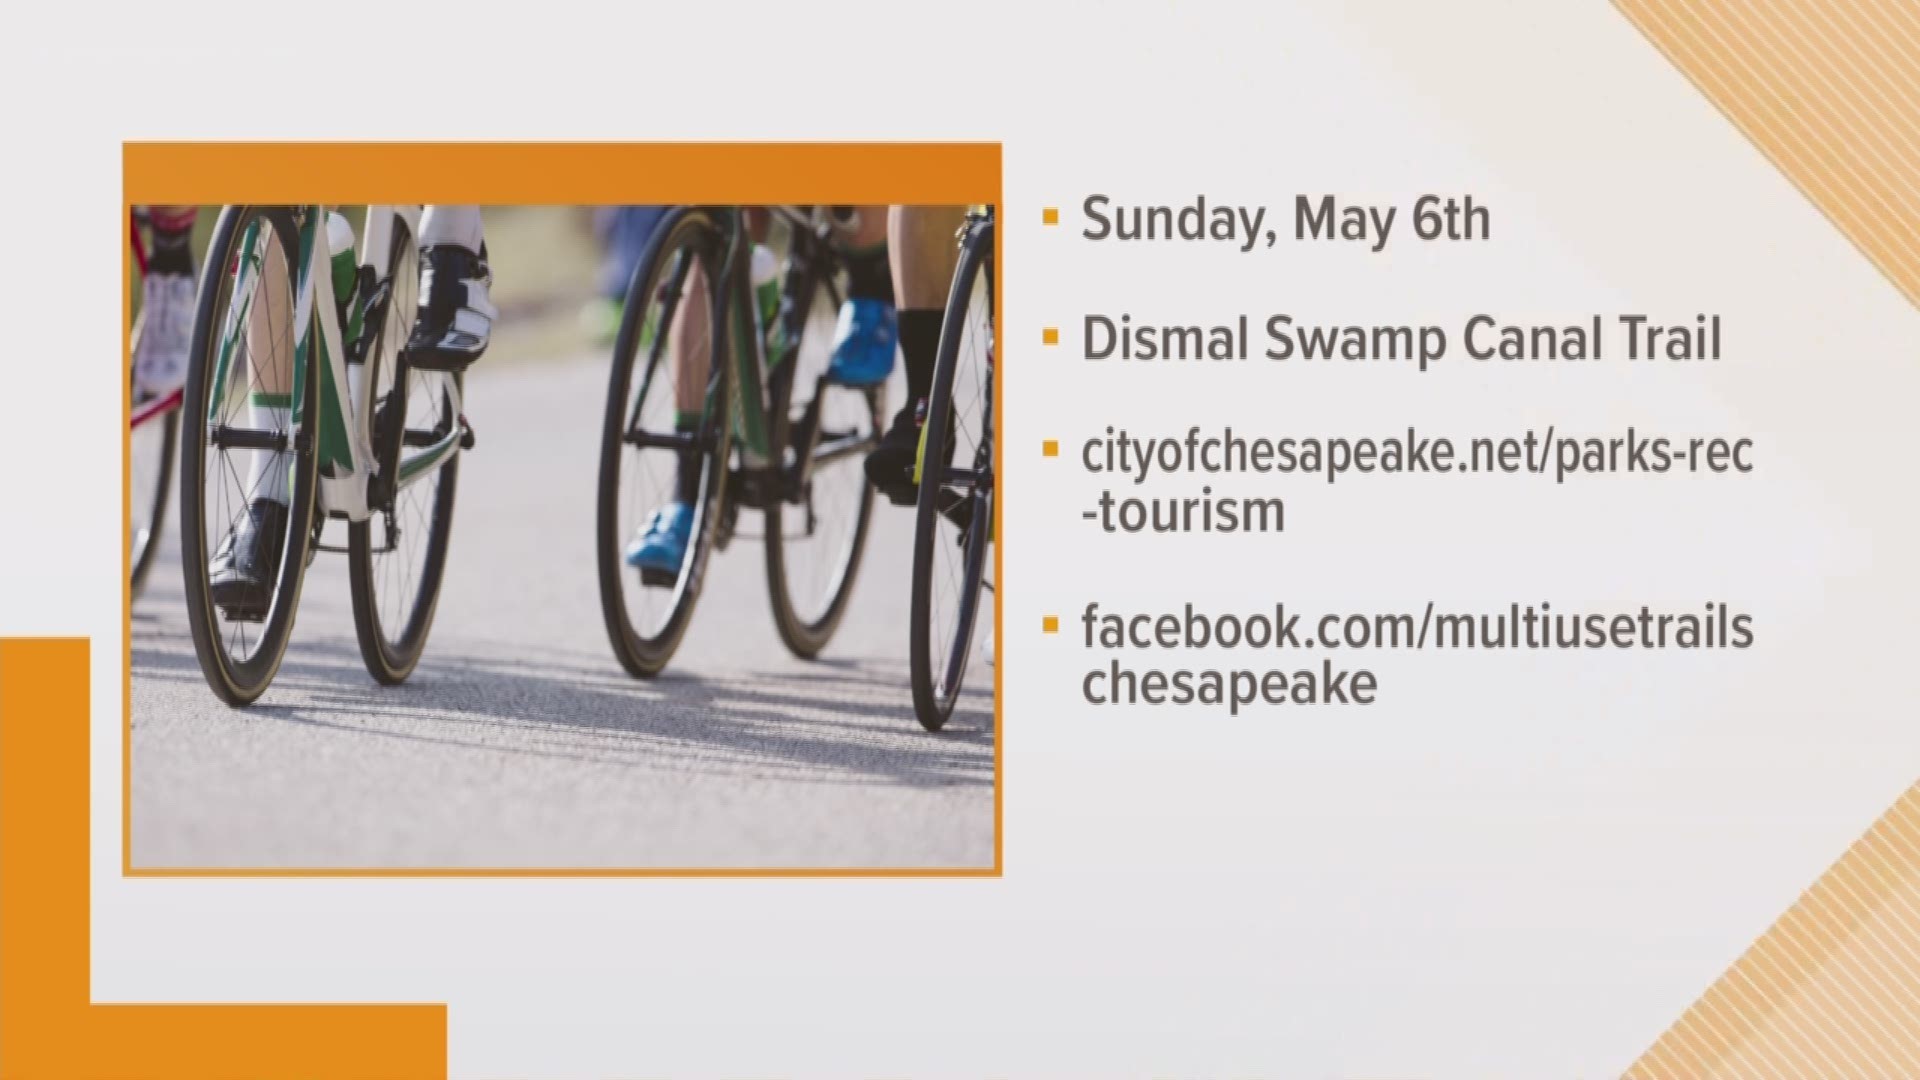 People from across Hampton Roads will hit the Dismal Swamp Canal Trail this weekend for the annual Chesapeake BikeFest.